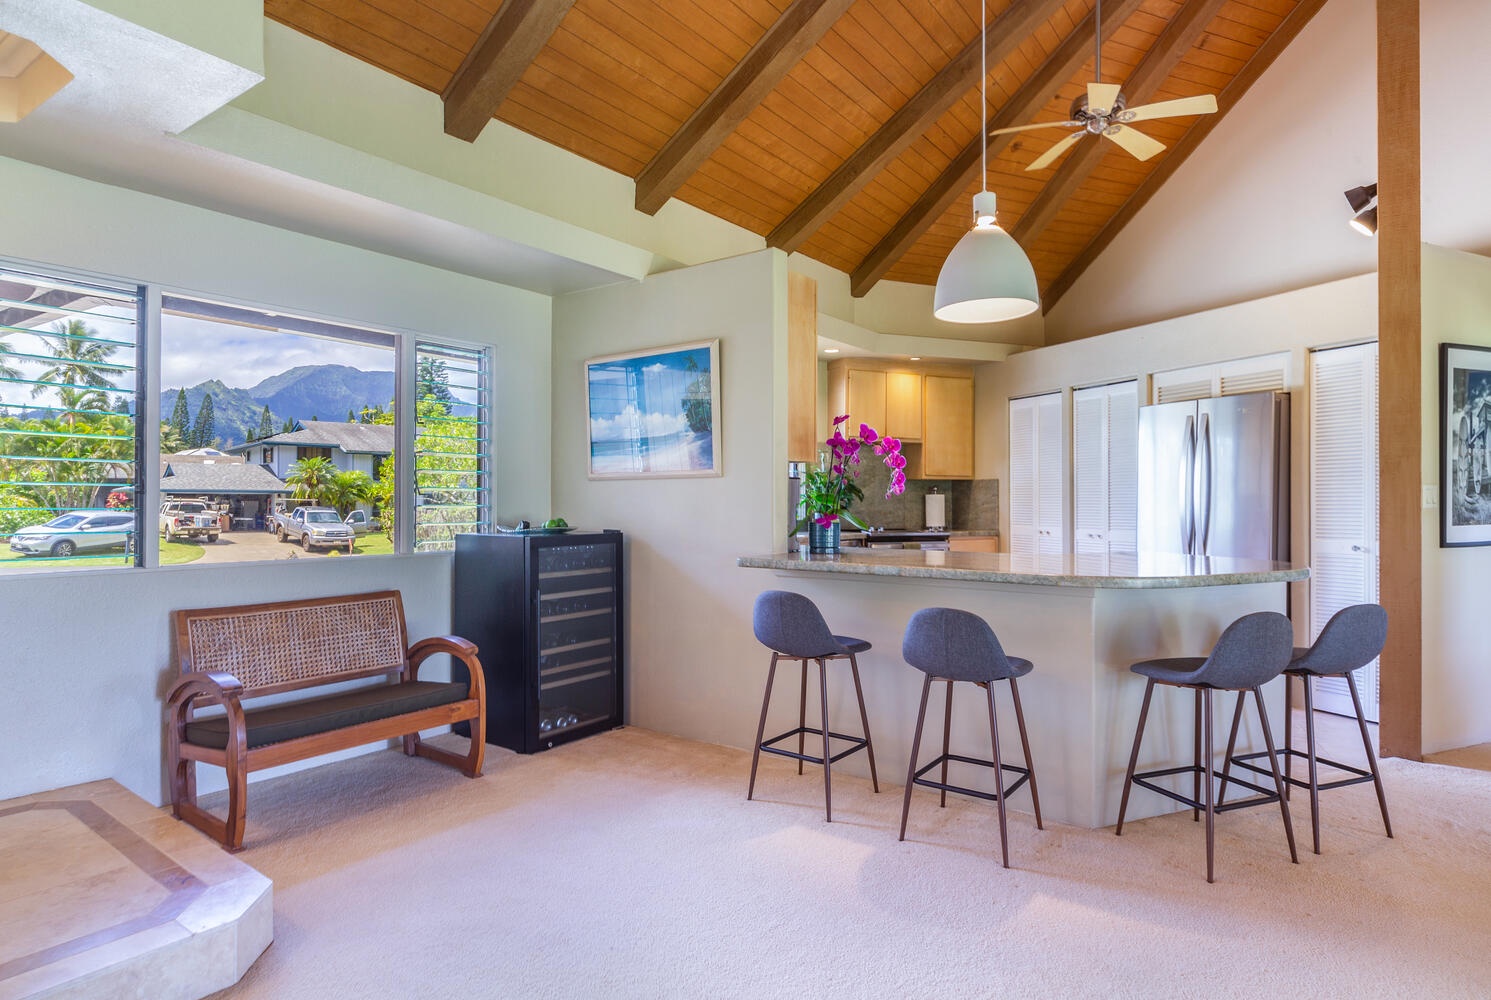 Princeville Vacation Rentals, Wai Puna - The fully equipped kitchen comes with a number of stainless steel appliances, storage space, and Granite countertops with a bar area and 4 stools